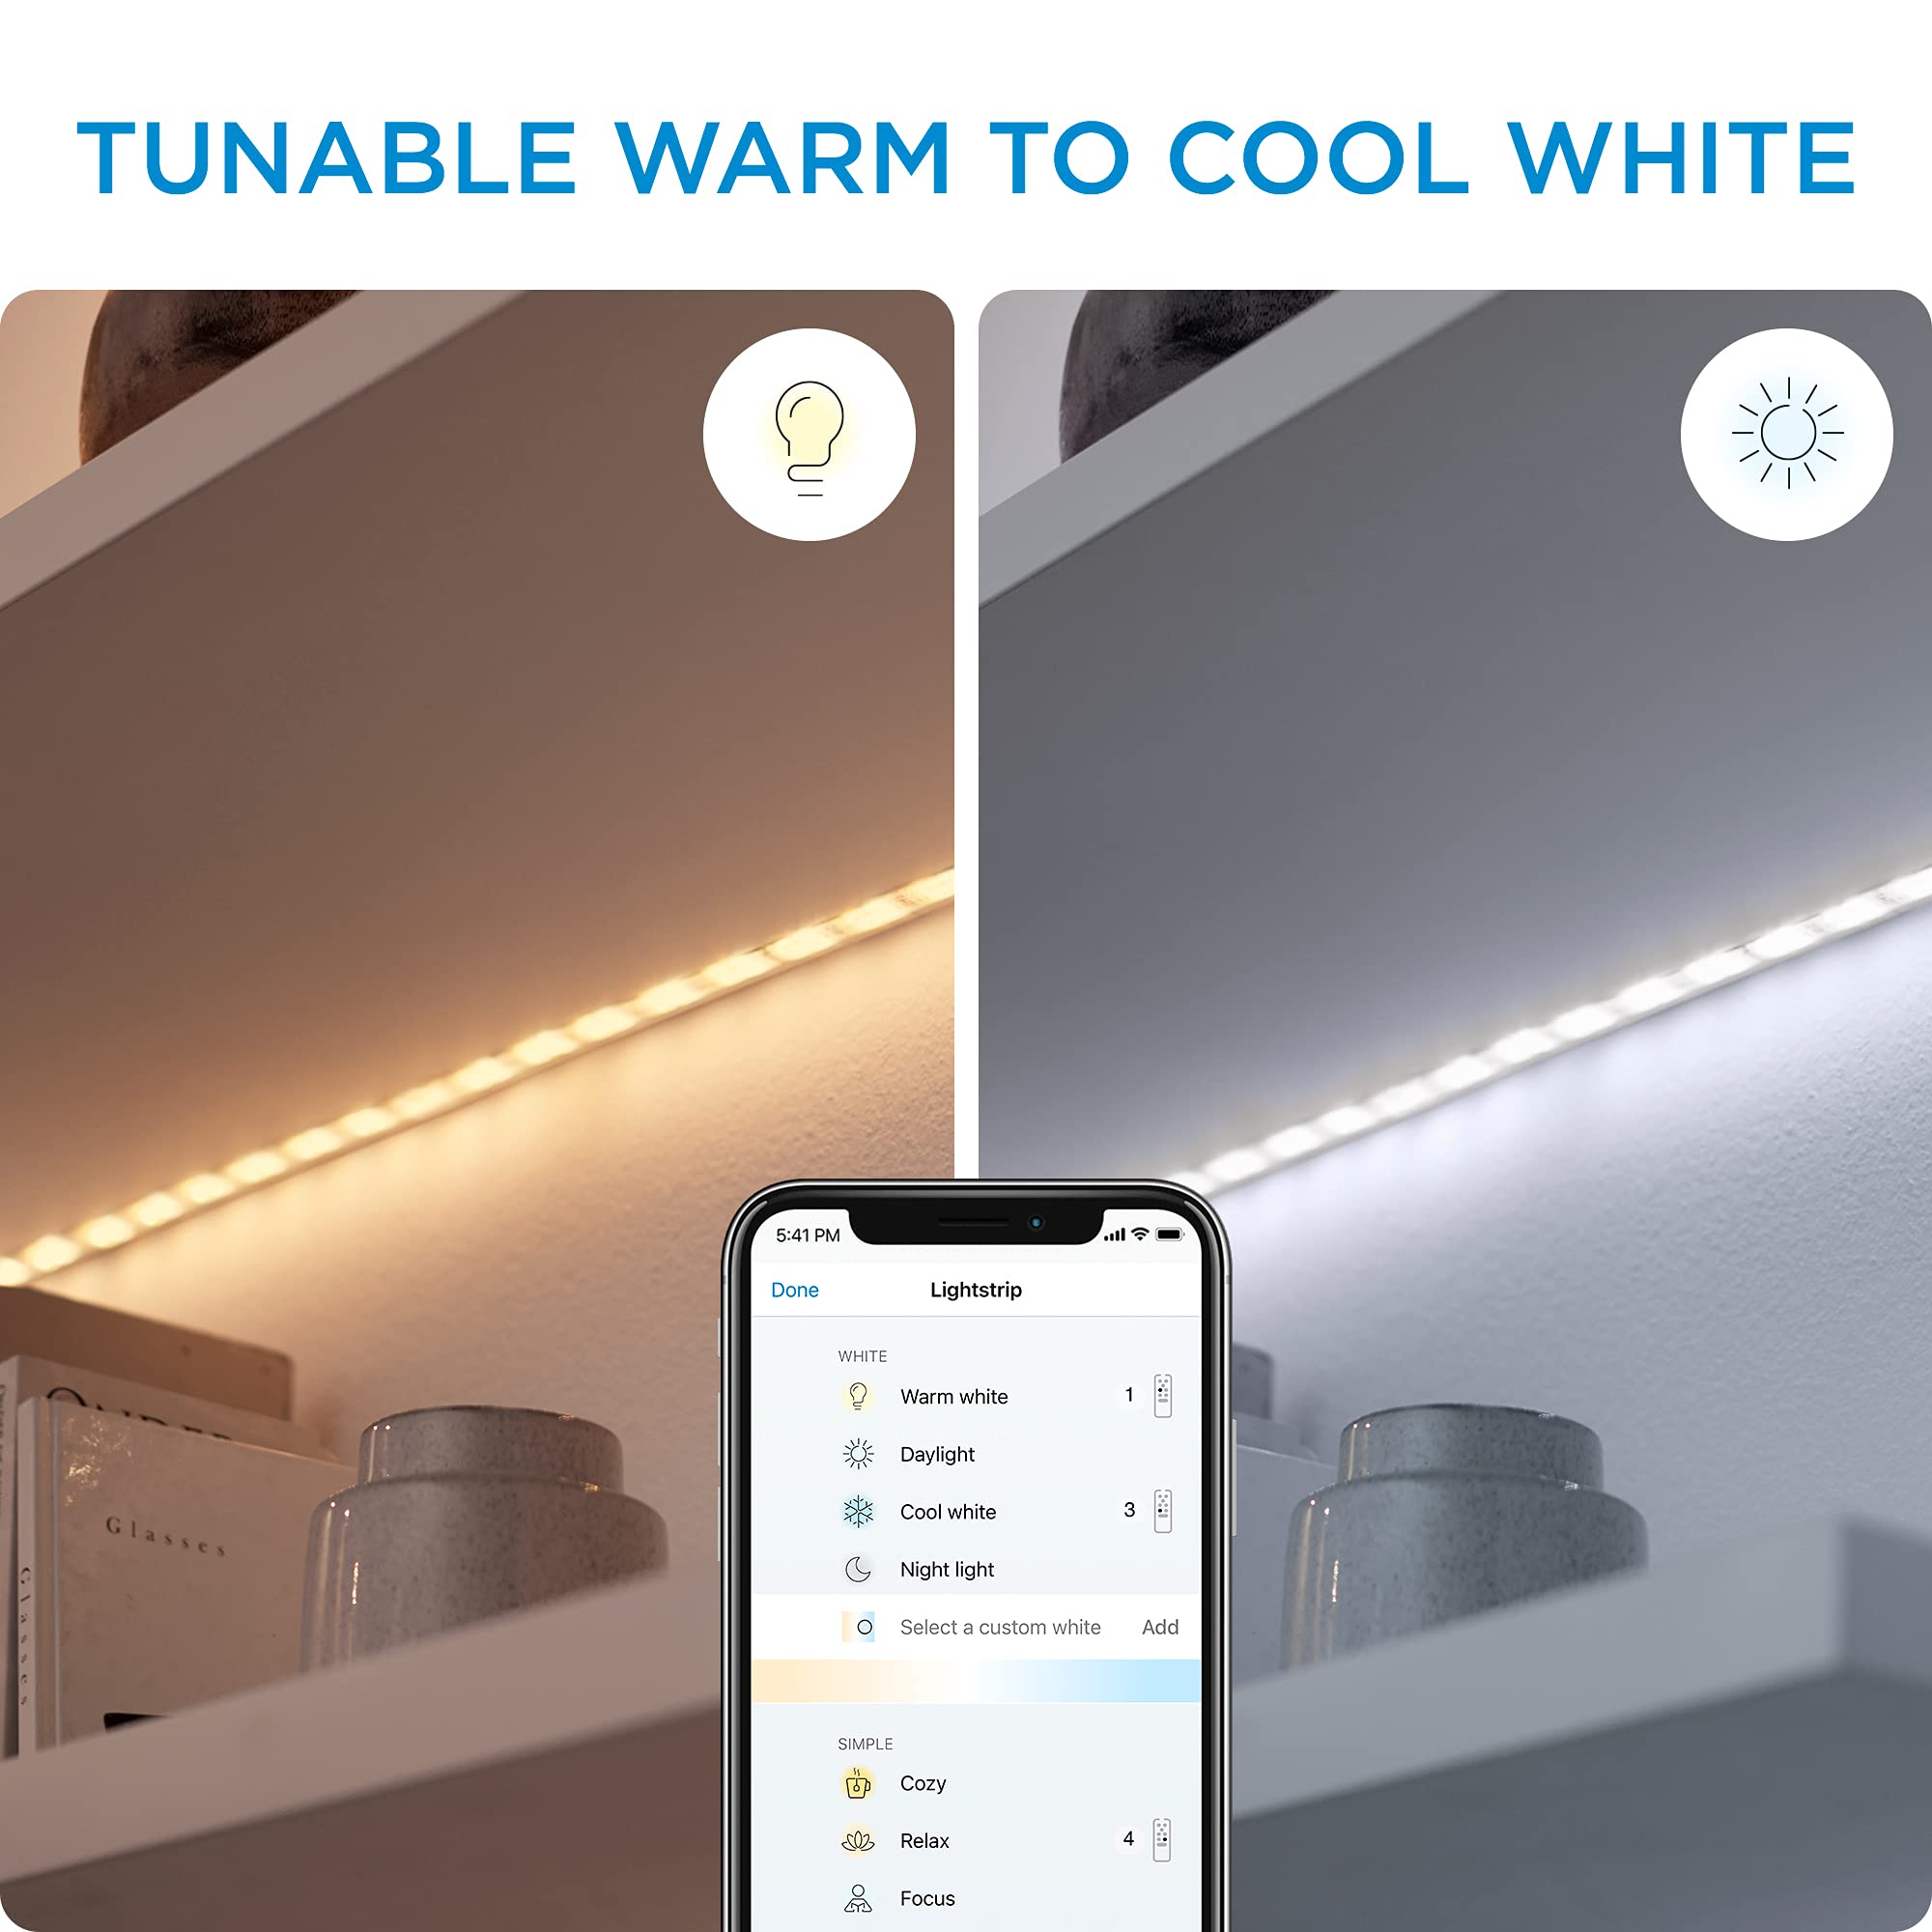 WiZ Full Color and Warm White Wi-Fi LED Light Strip 2M+2M with plug, Smart Control With Wiz App, Compatible with Alexa, Google Assistant, Siri Shortcuts, and Matter, Connects To Wi-Fi, No Hub Required